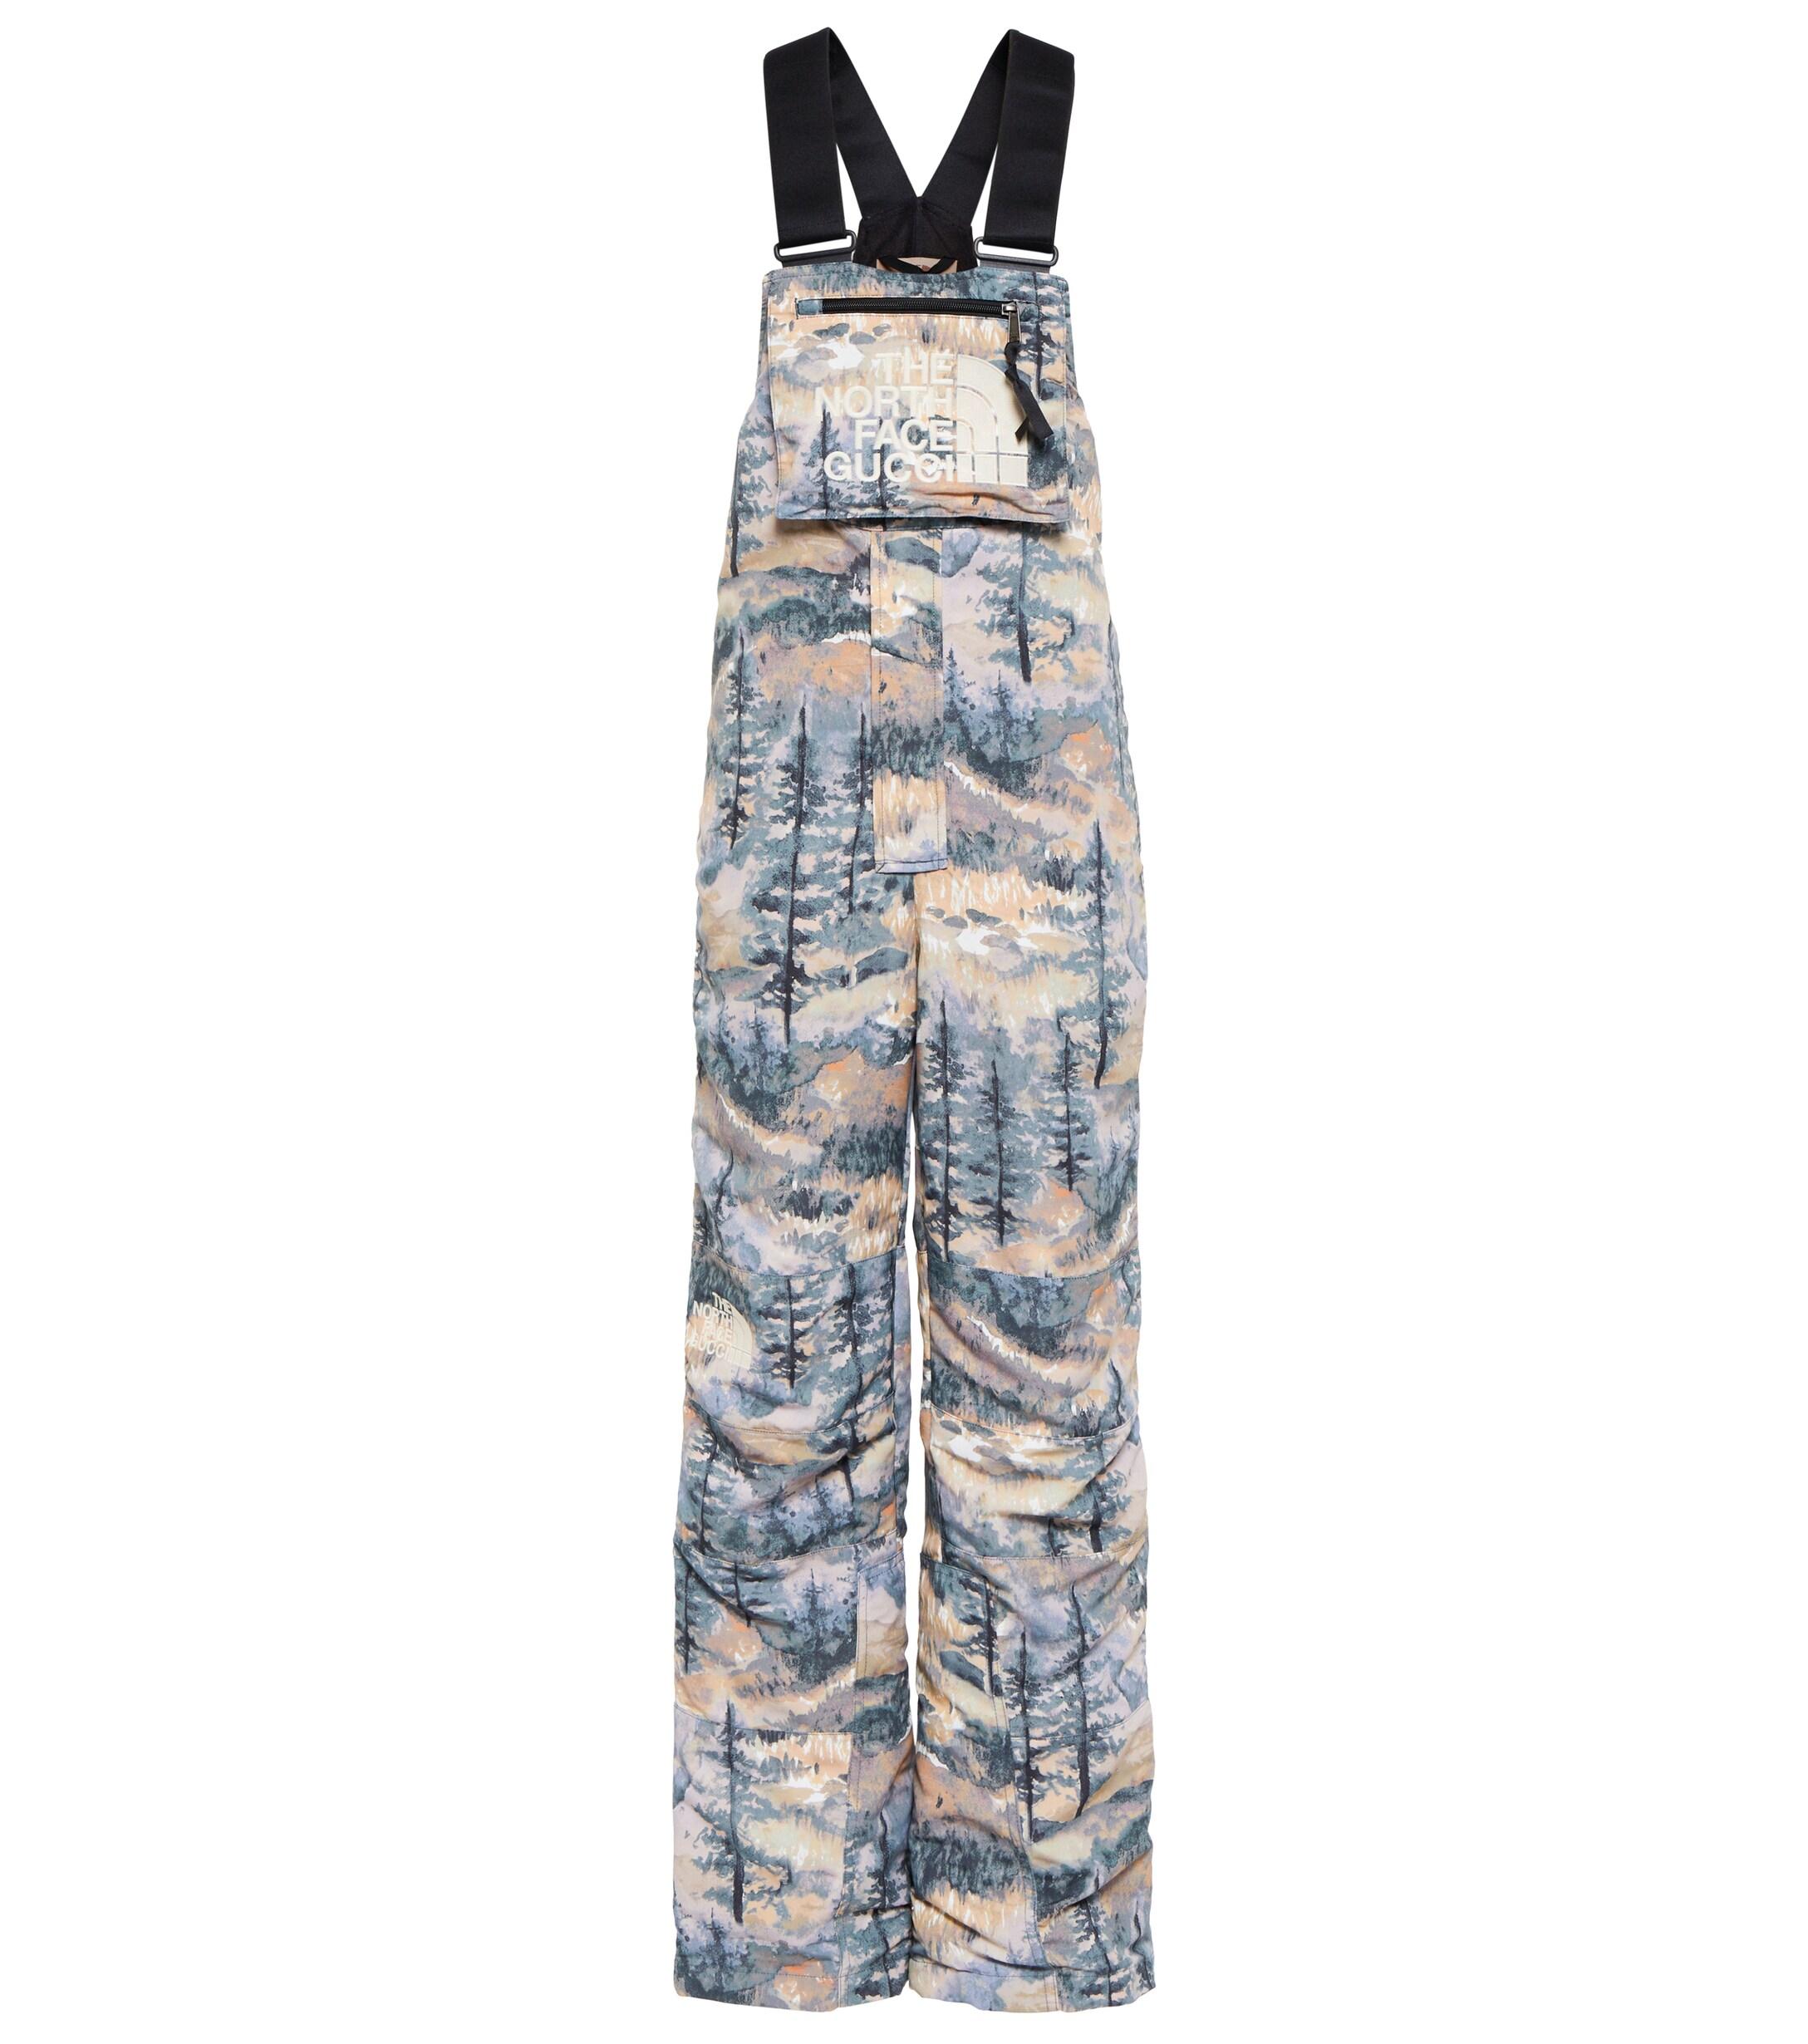 Gucci X The North Face Printed Overalls | Lyst